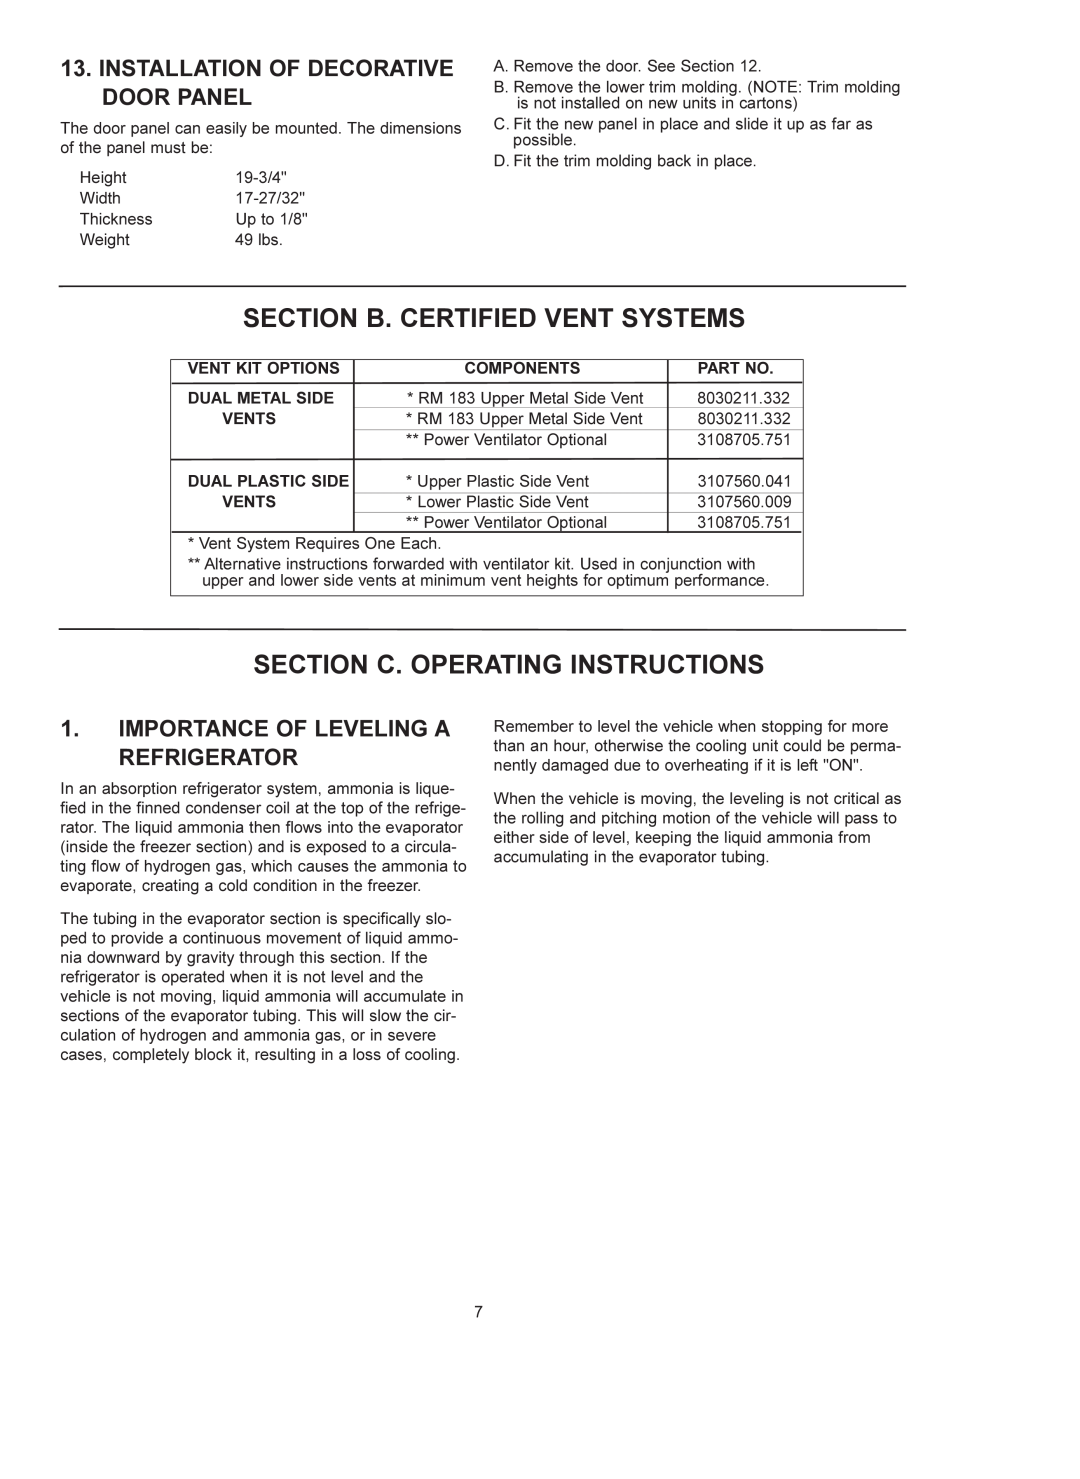 Dometic RM 4223 manual Section B. Certified Vent Systems, Section C. Operating Instructions 